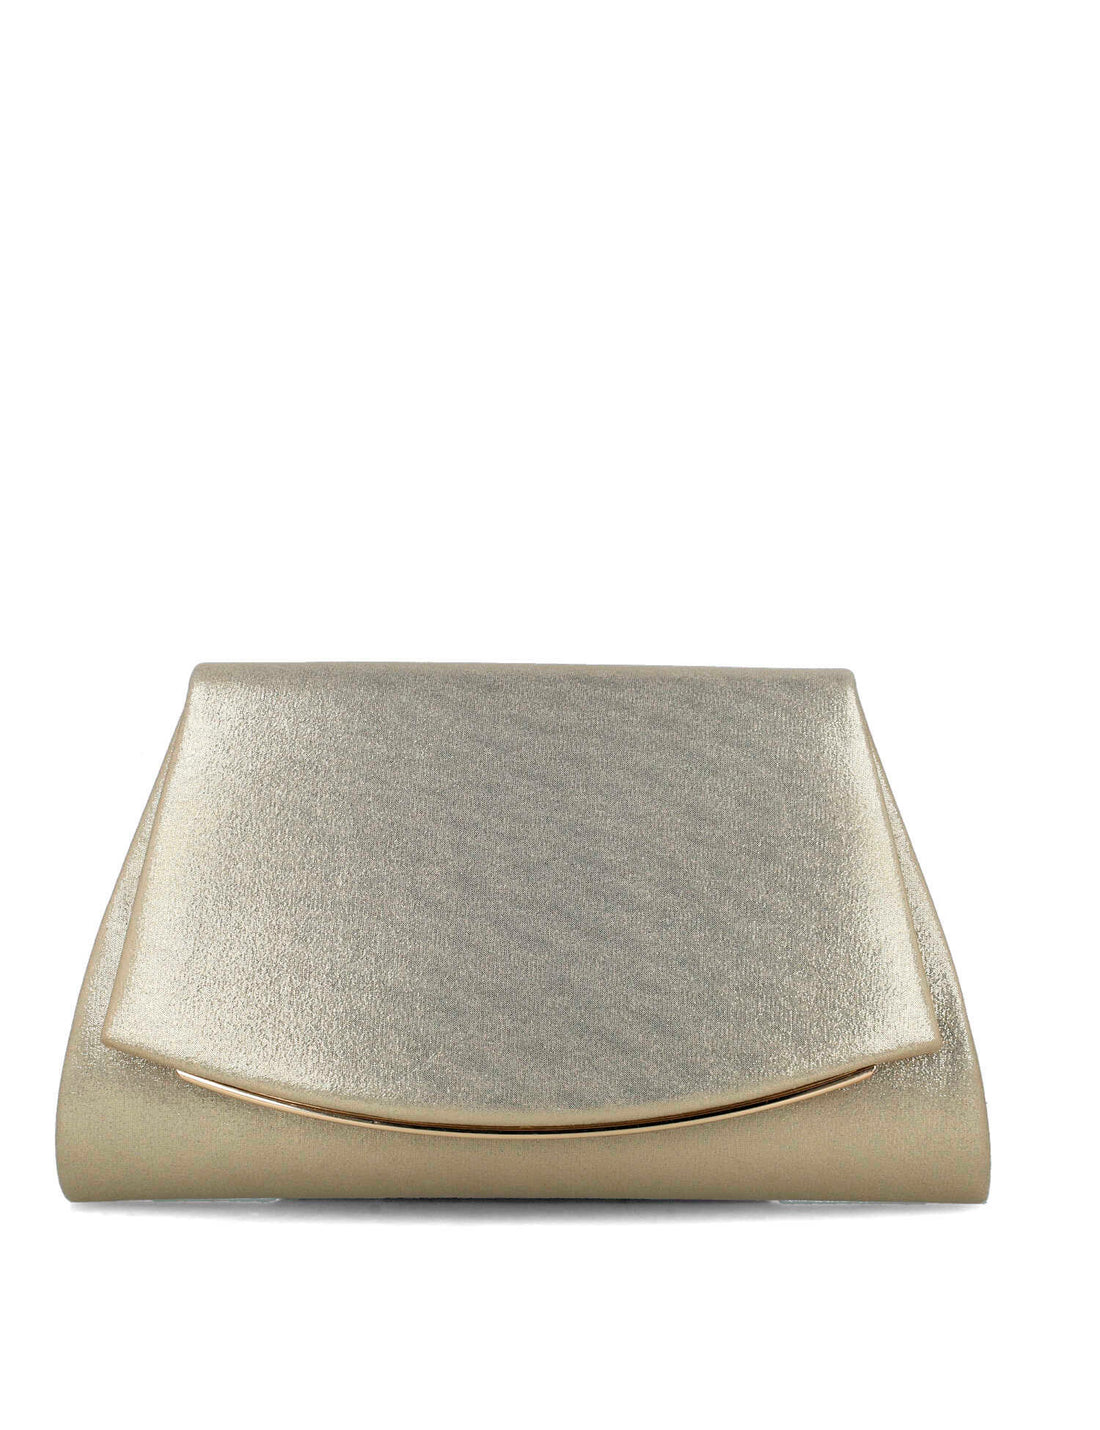 Gold Shimmery Clutch_85486_00_01